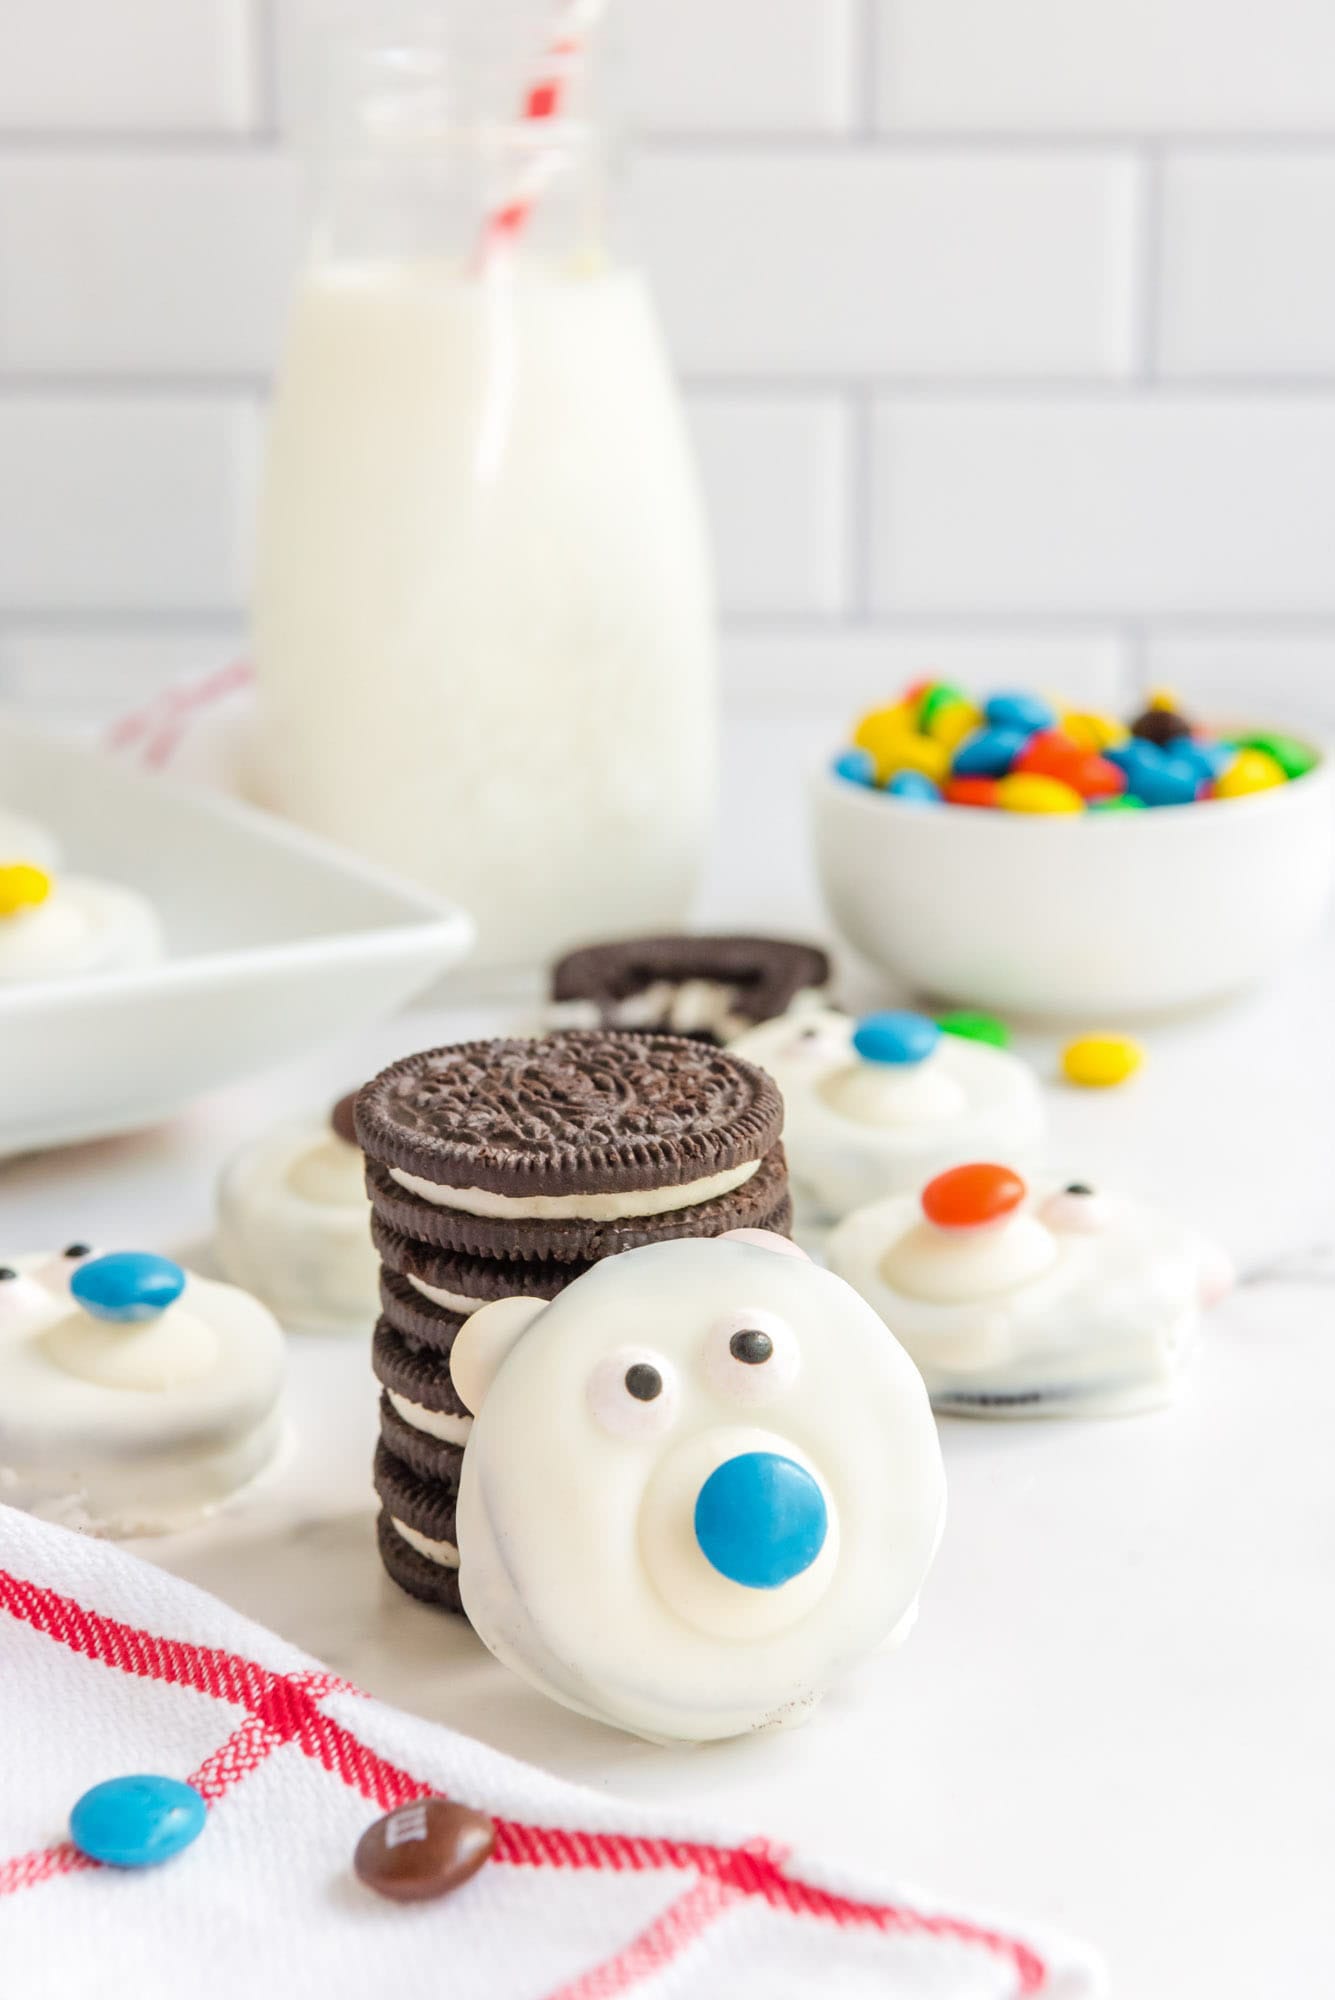 Polar bear cookie, and stacked oreo cookies in the background. And a bottle of milk with a straw in the background.